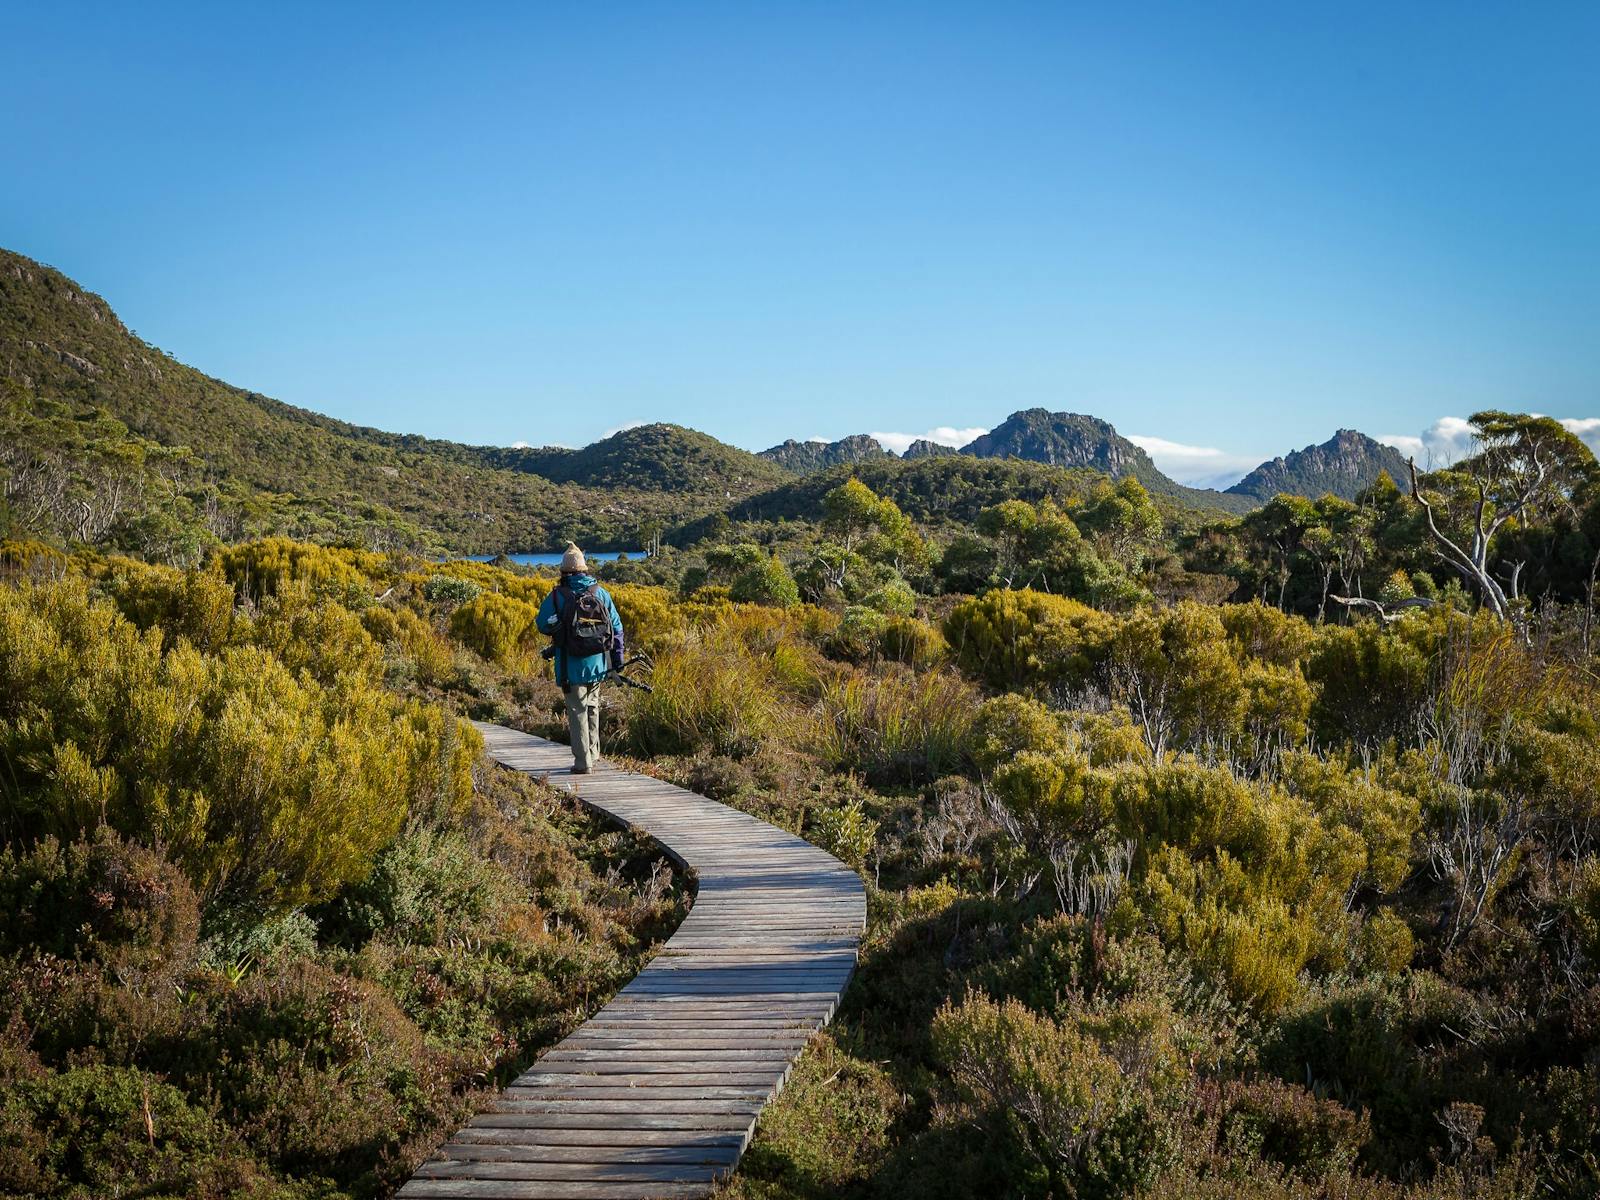 A guest walking on wooden path through the Alpine moorland with rugged mountain tops in the distance